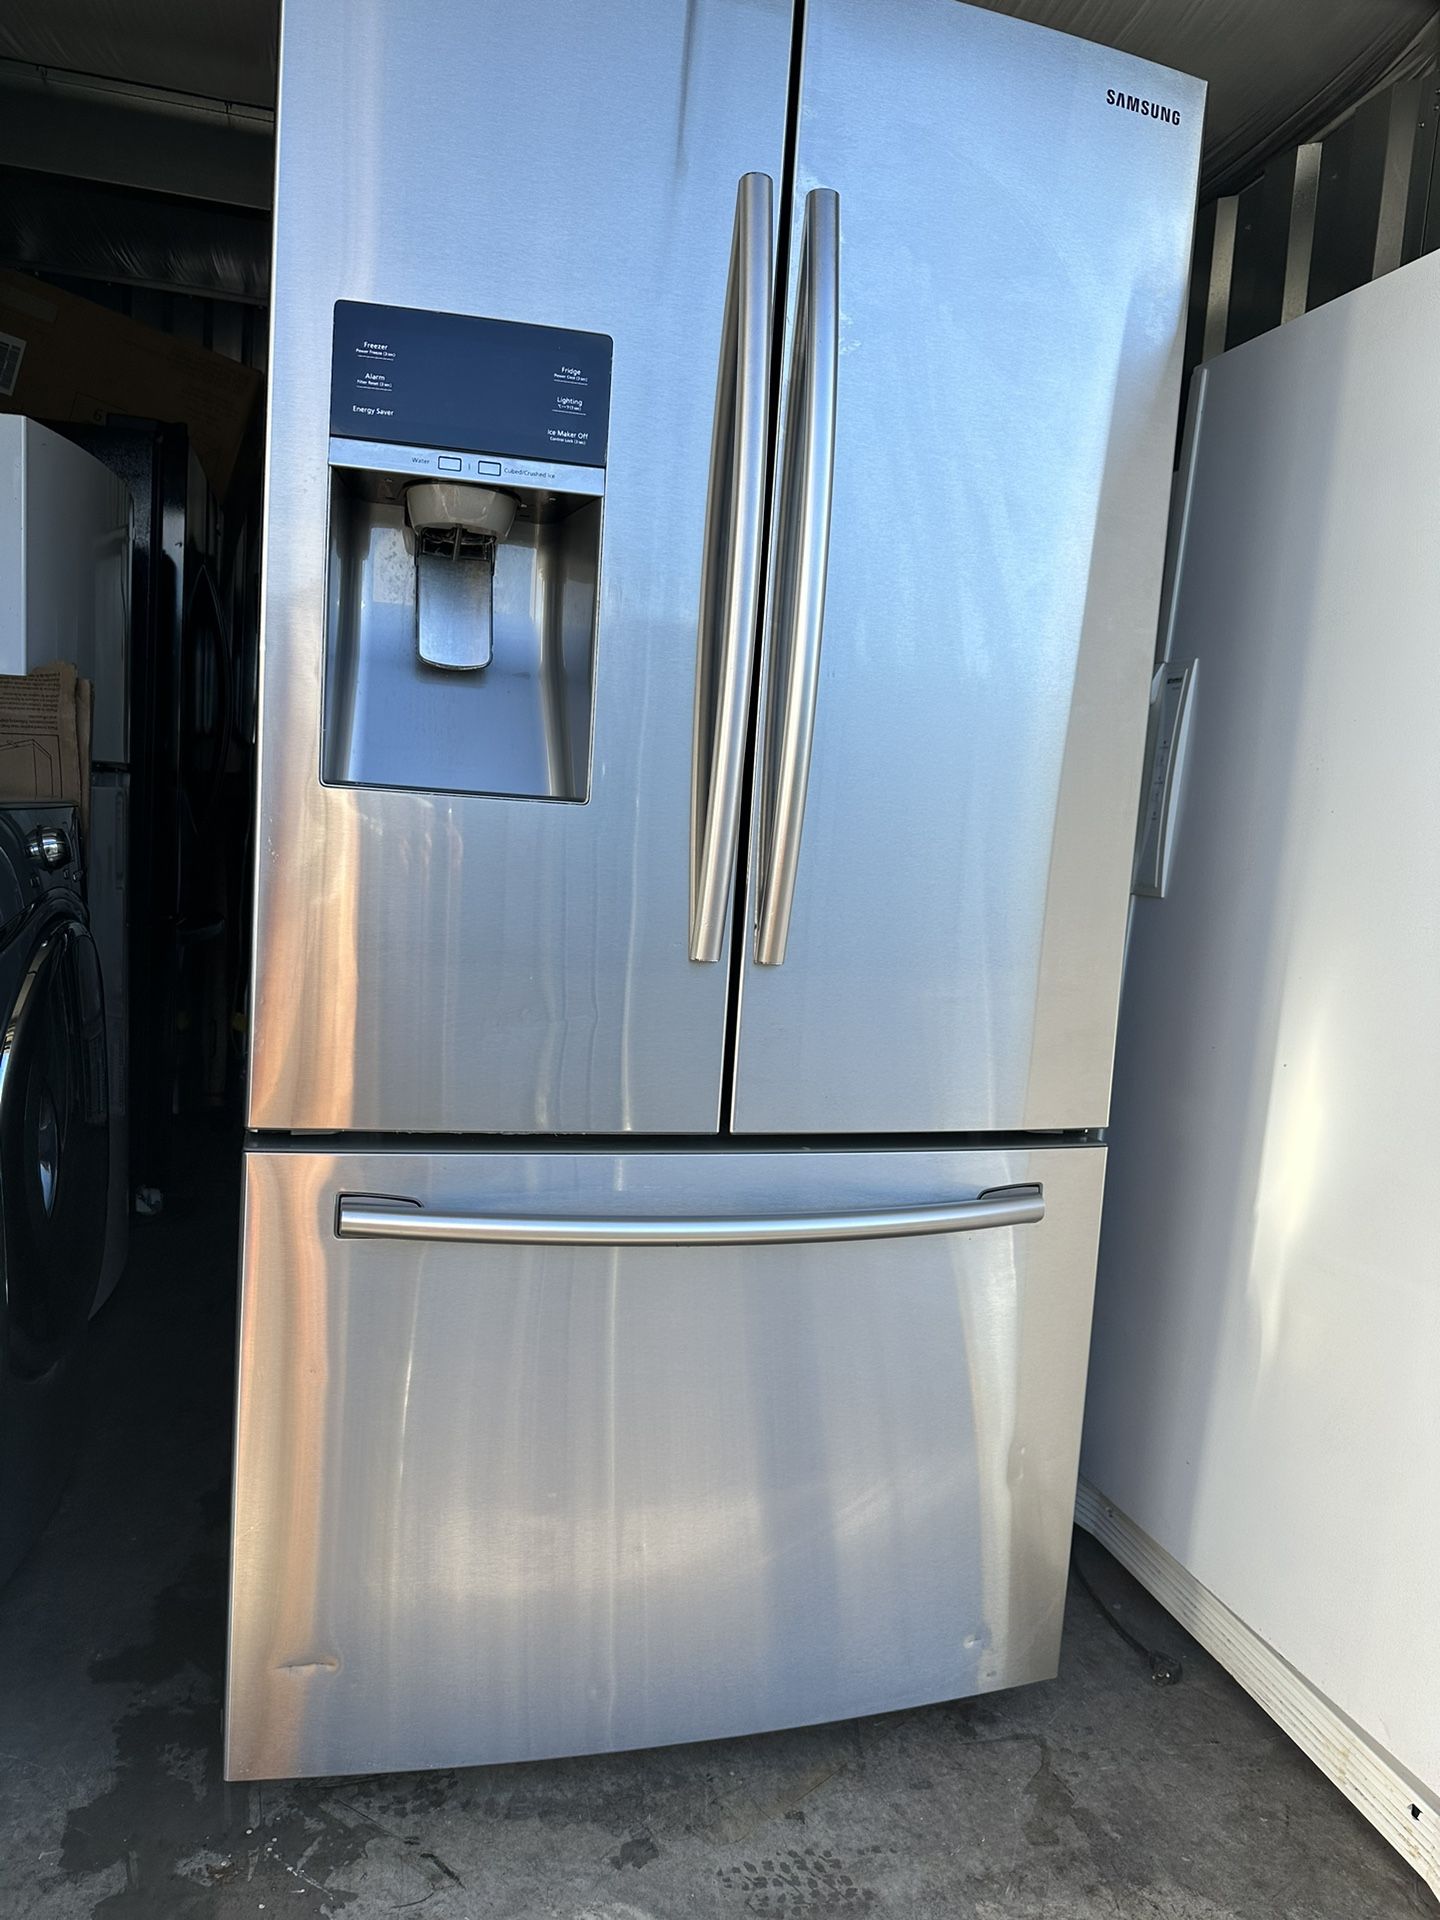 SAMSUNG REFRIGERATOR for Sale in Springfield, MA - OfferUp